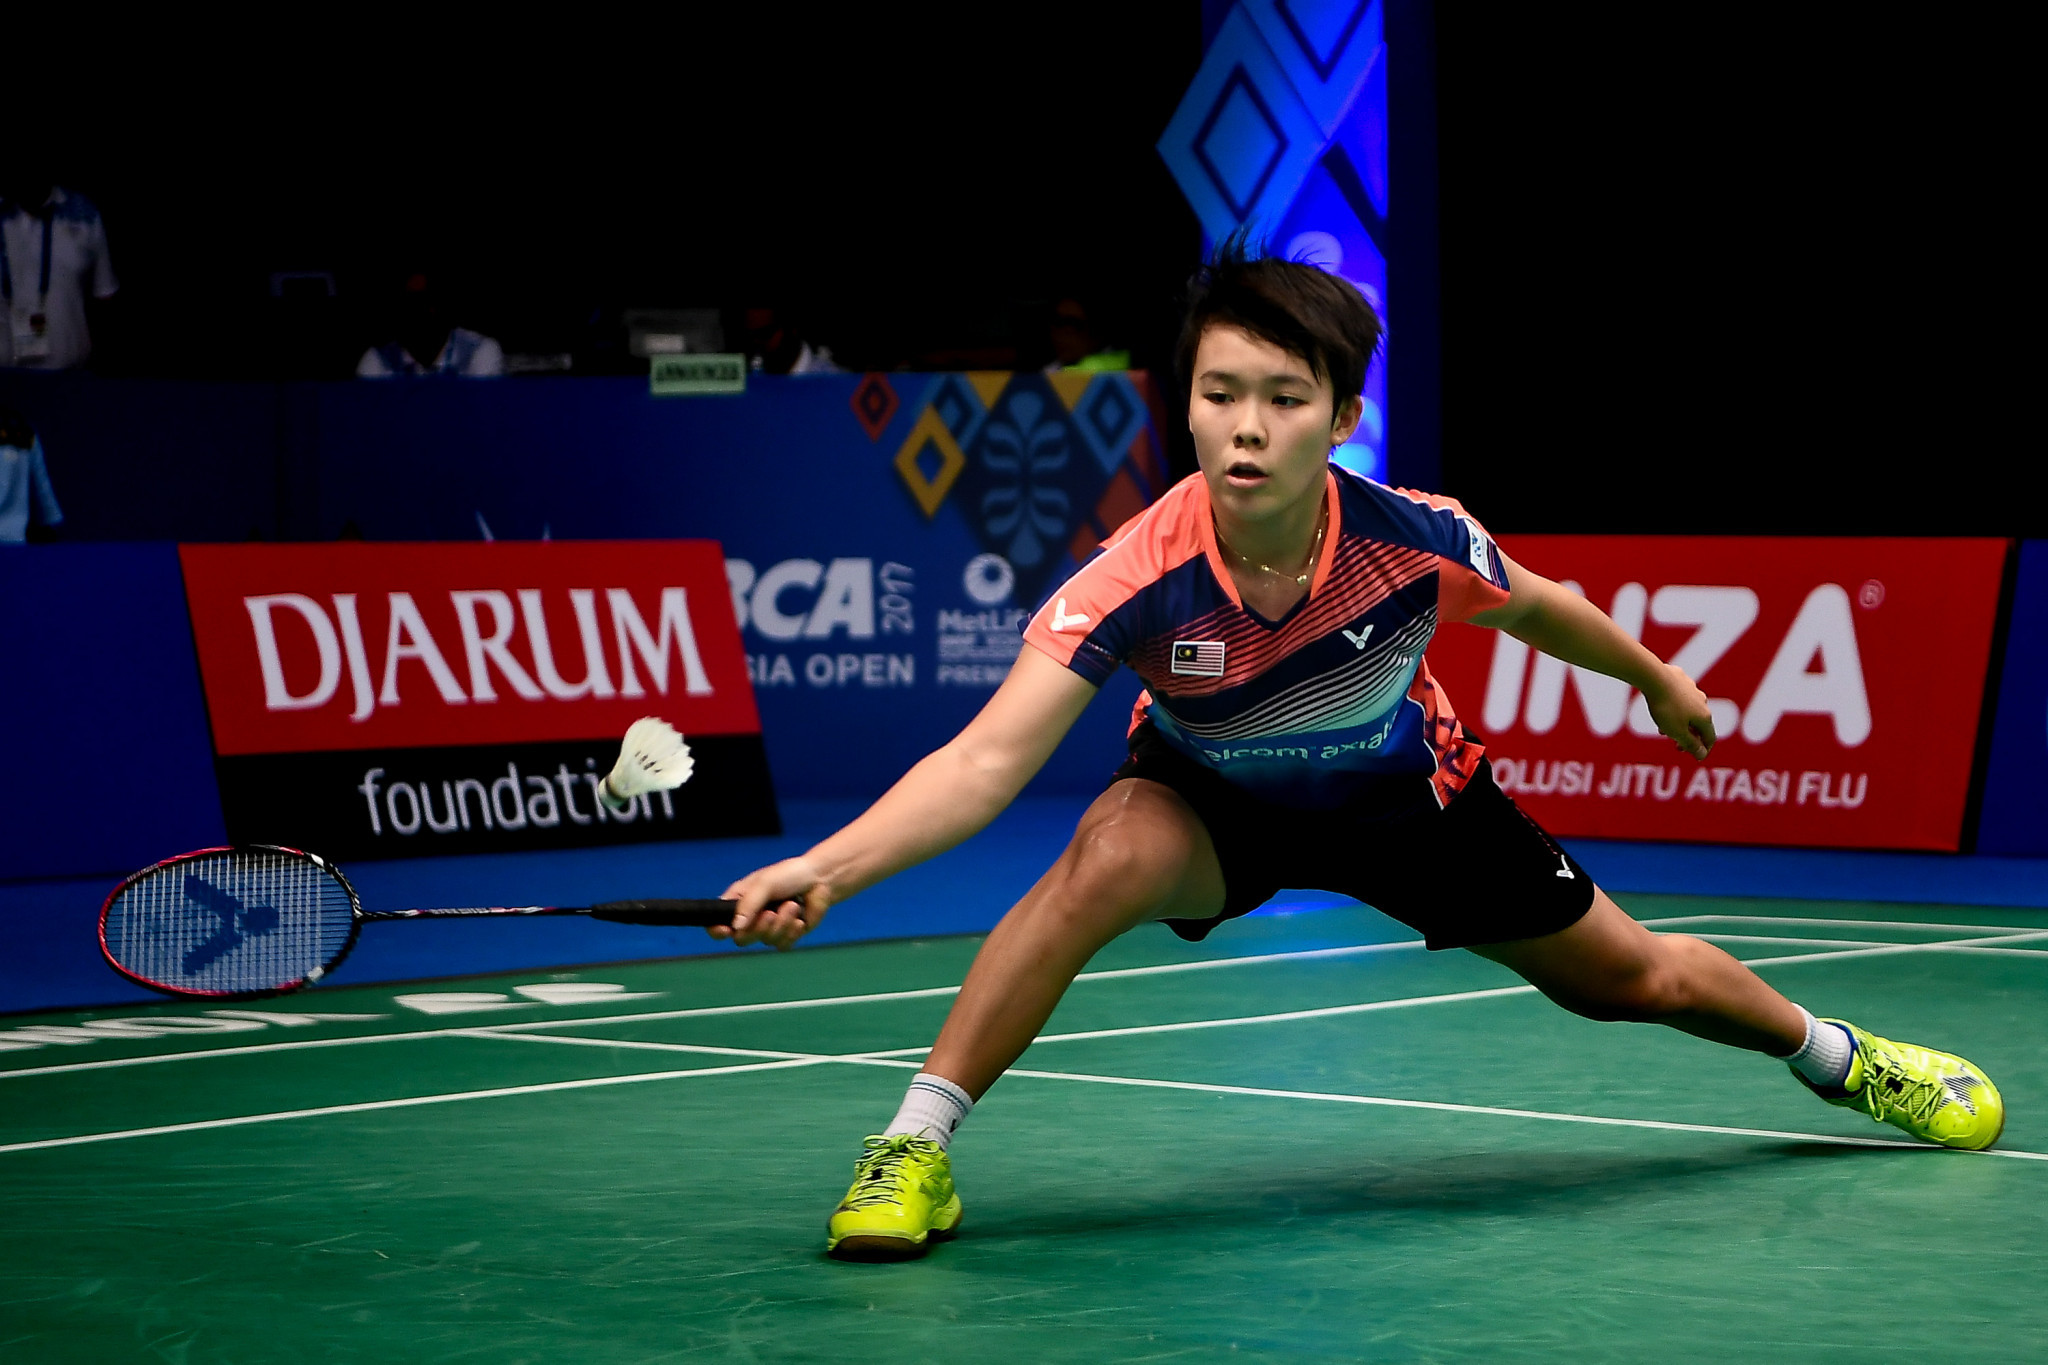 Malaysia's Goh Jin Wei has confirmed she will only compete in the singles competition at the Championships ©Getty Images